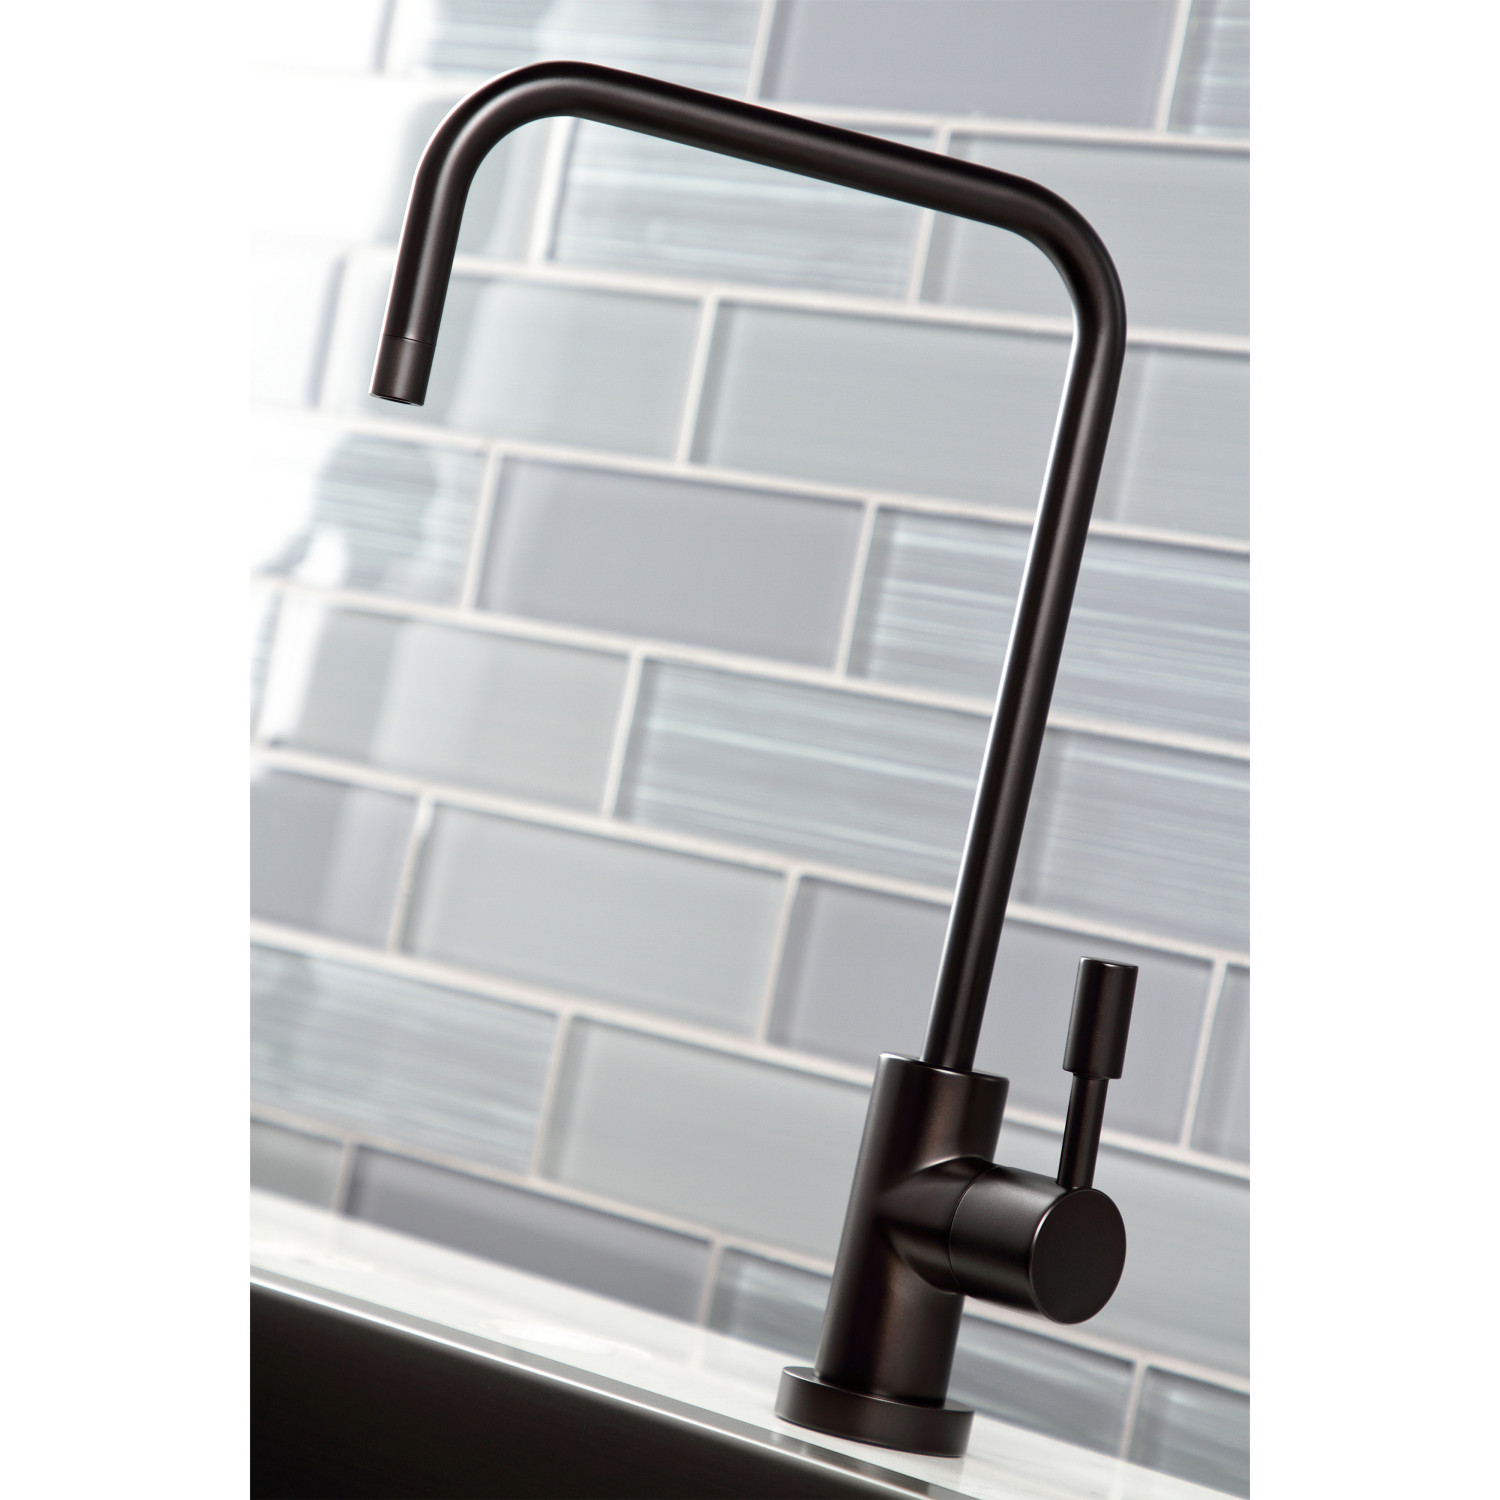 Kingston Brass KS6195DL Concord Single-Handle Water Filtration Faucet, Oil Rubbed Bronze - image 3 of 5